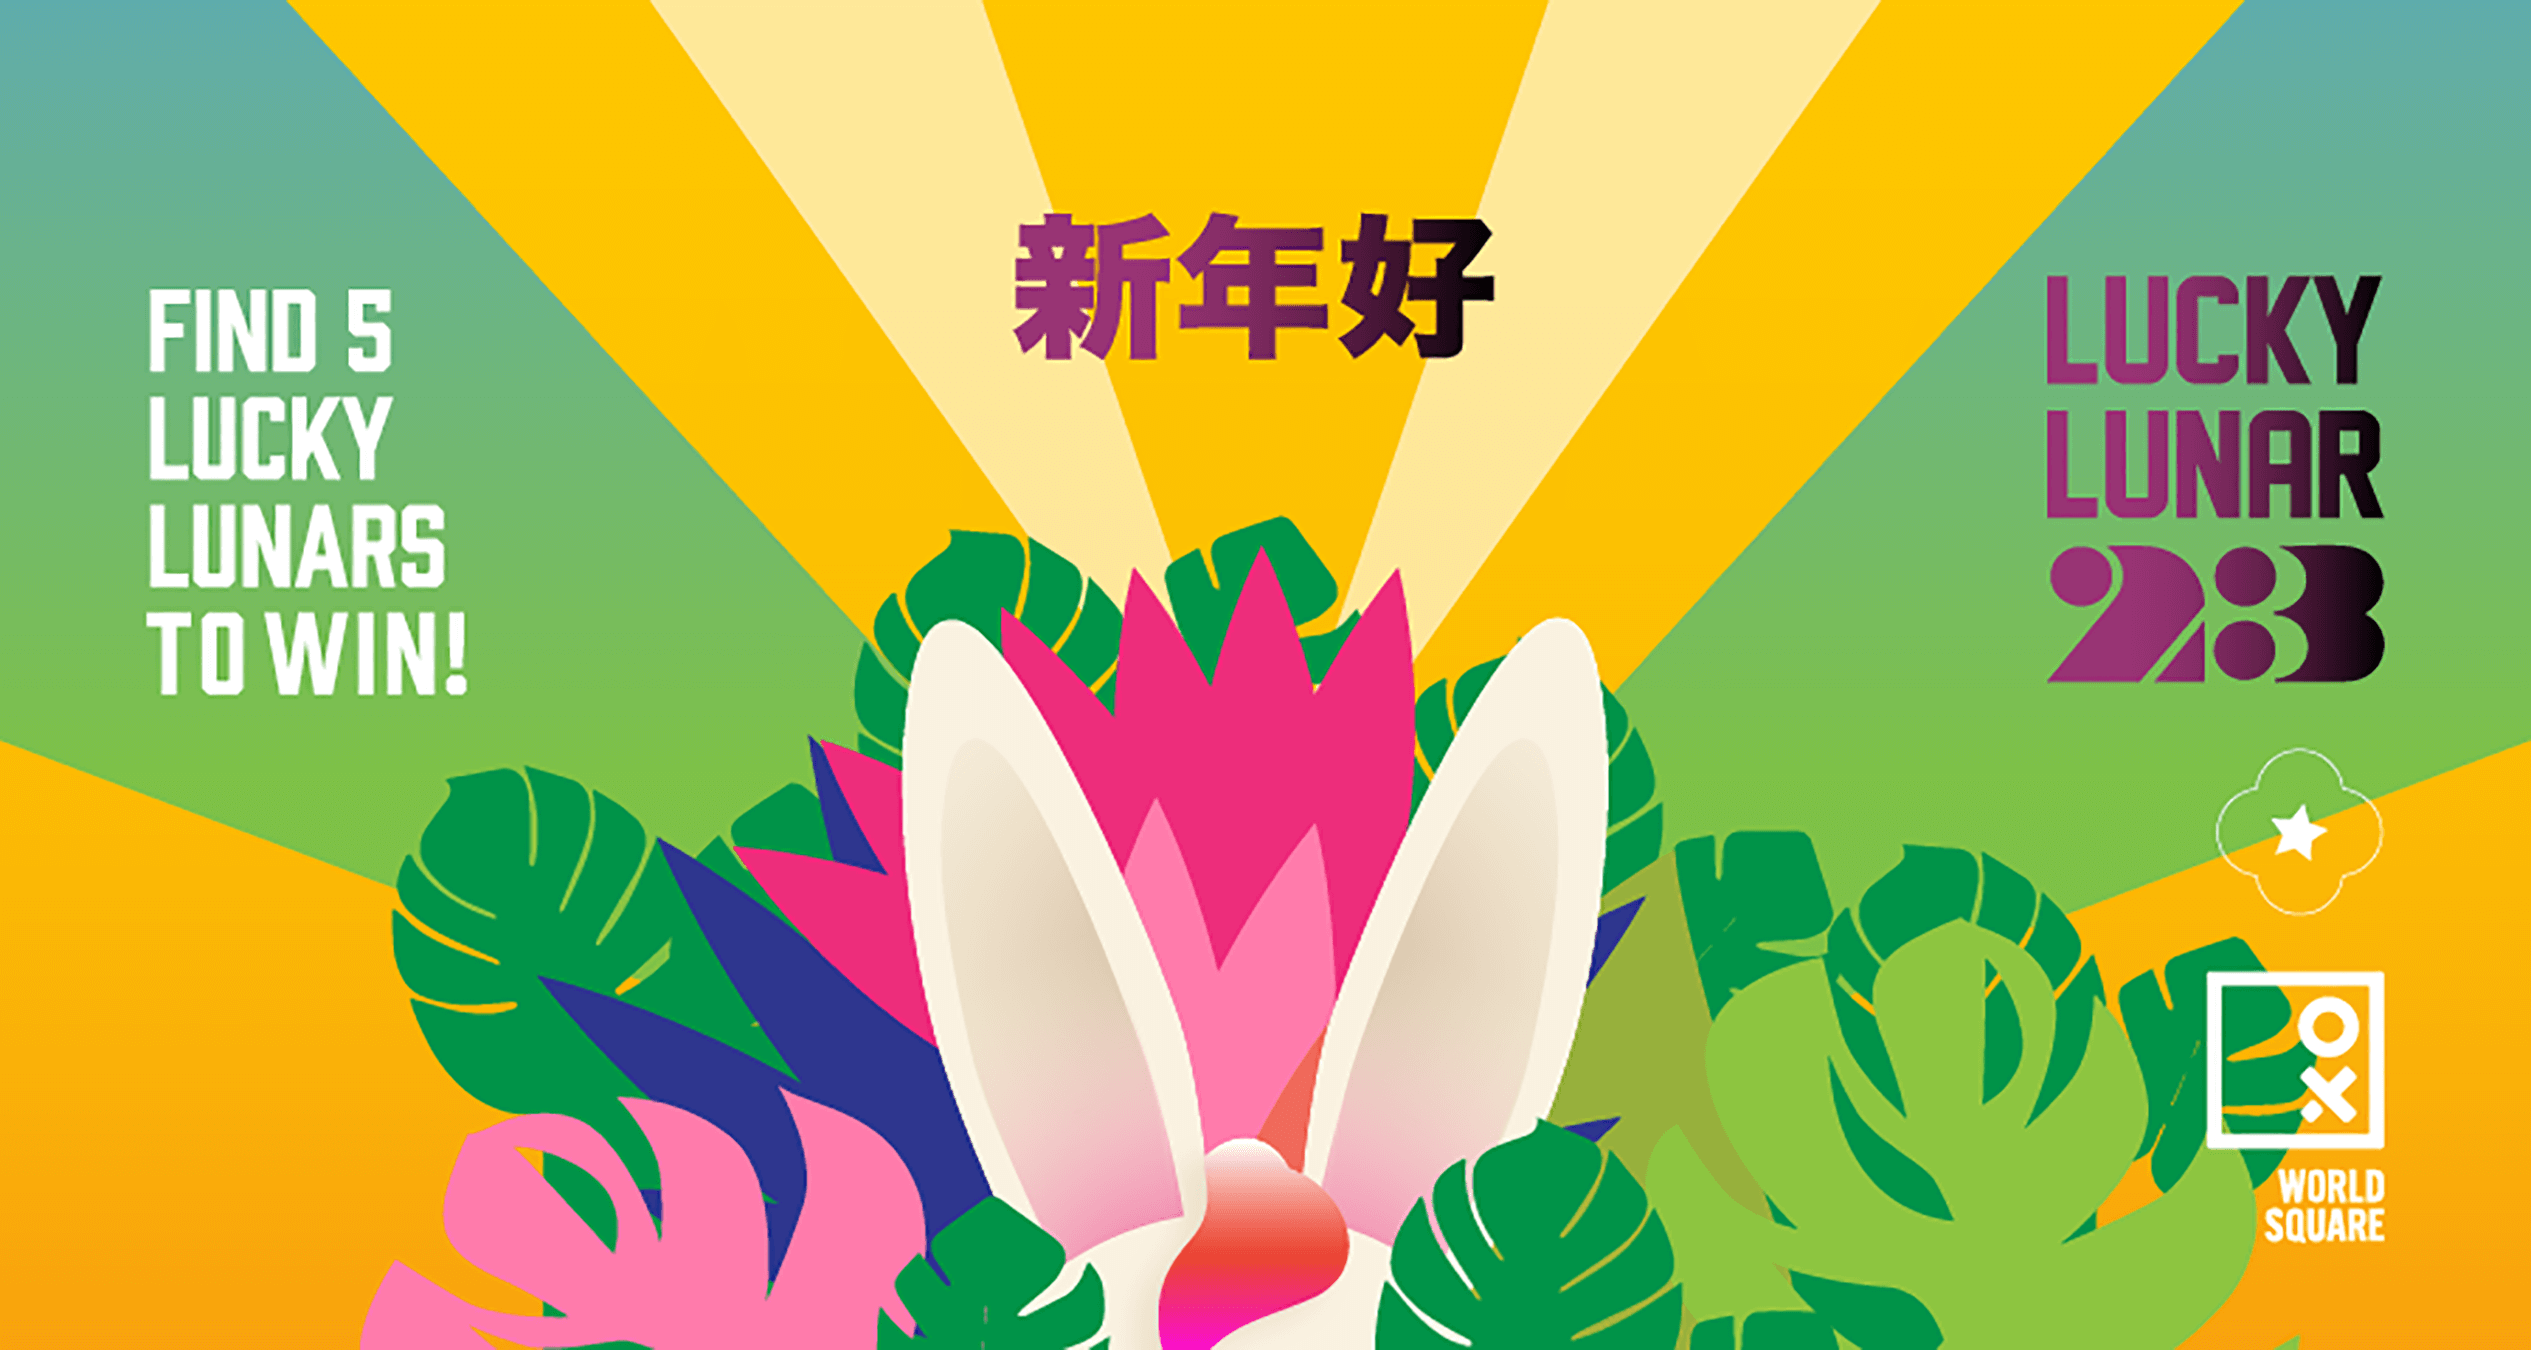 Digital art depicting rabbit ears to promote the Lucky Lunar Lunar New Year experiential brand activation for World Square Sydney